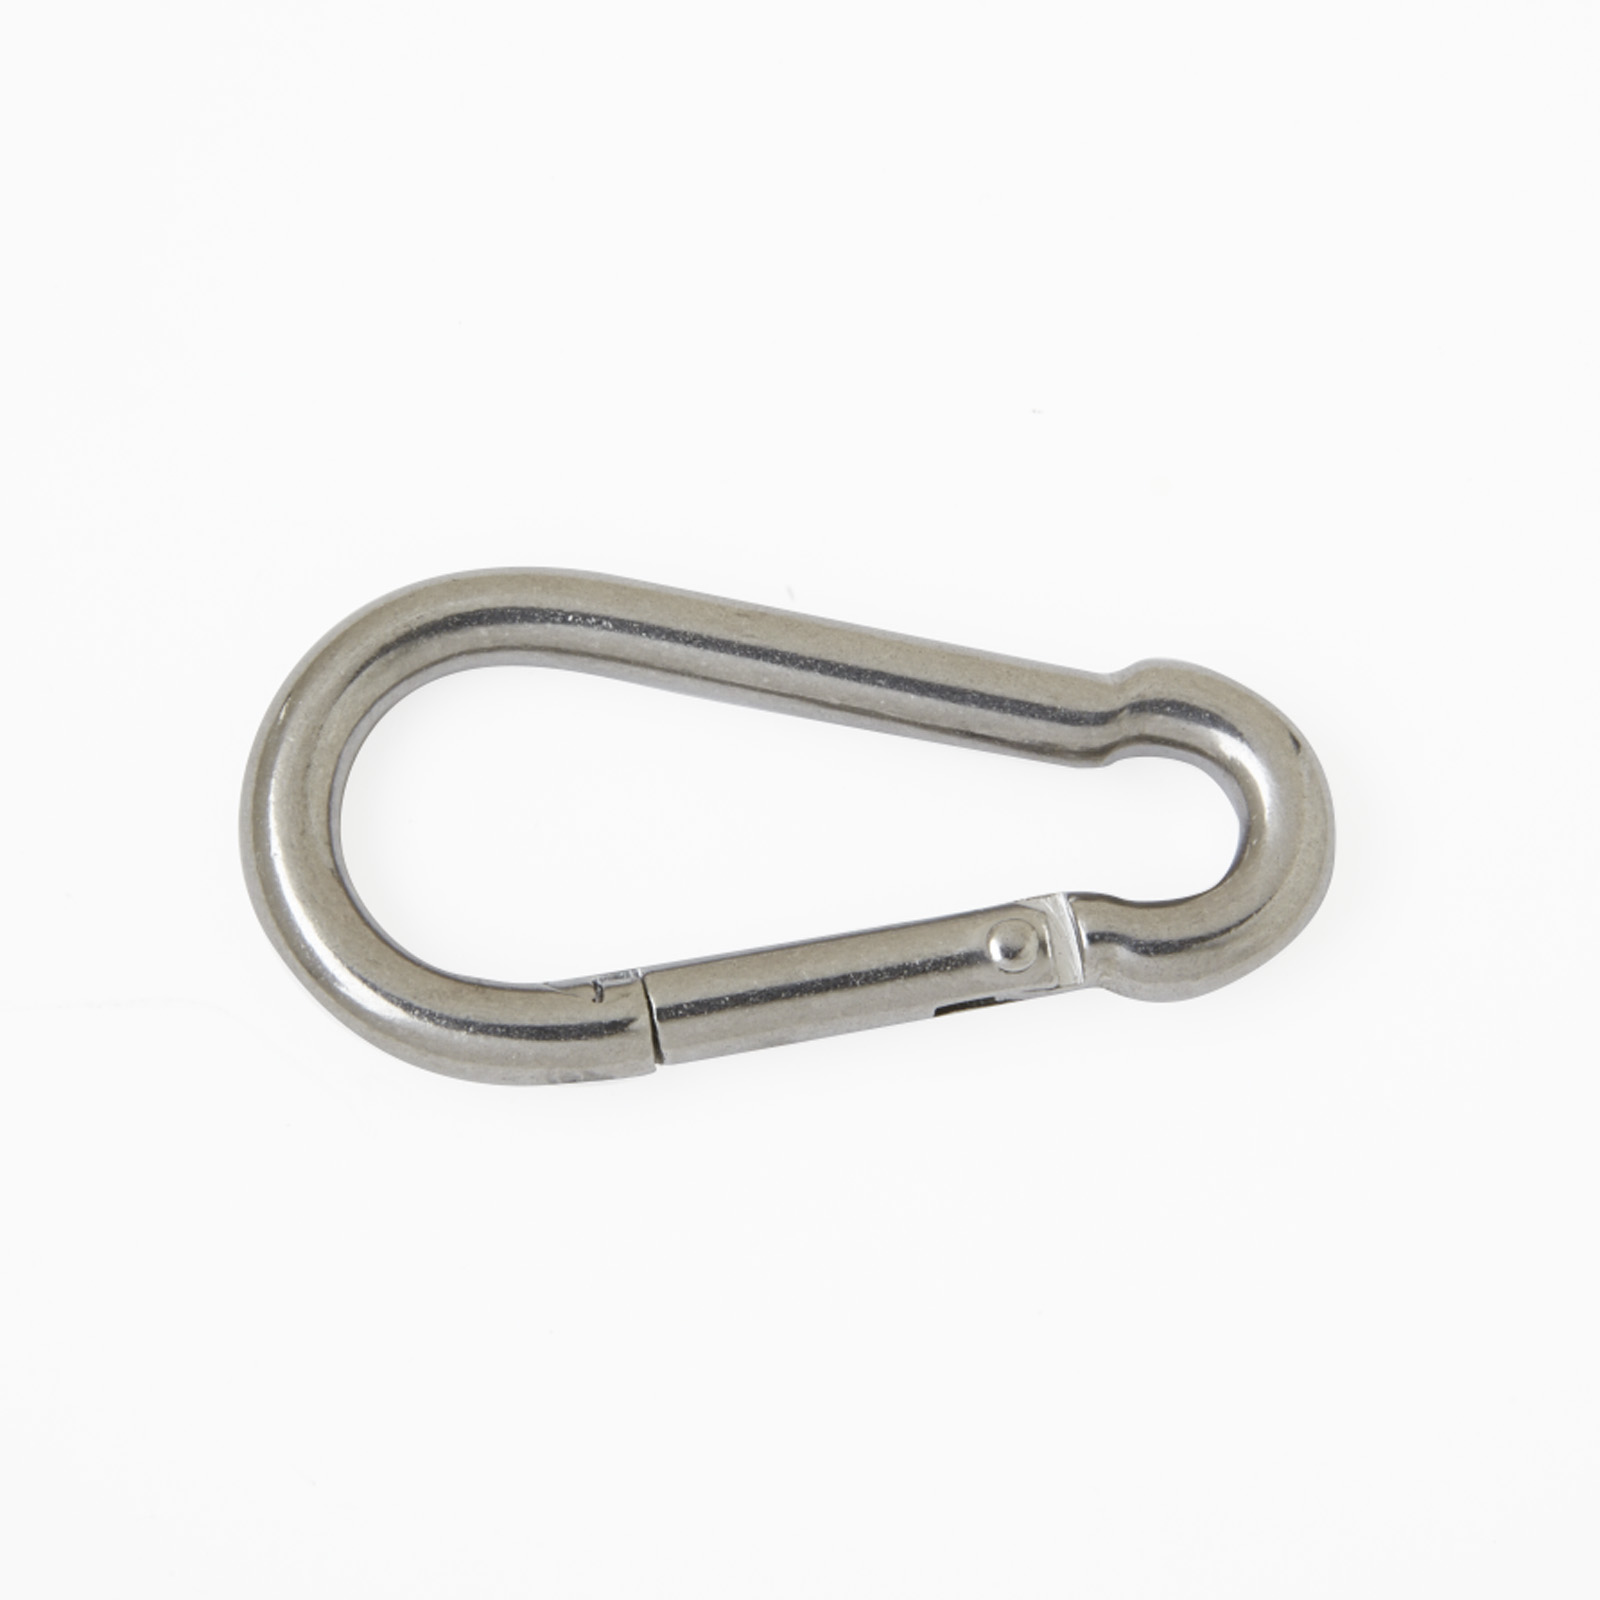 Snap Hook Carabiner Stainless Steel Safety Mountaineering Buckle M6x60MM 